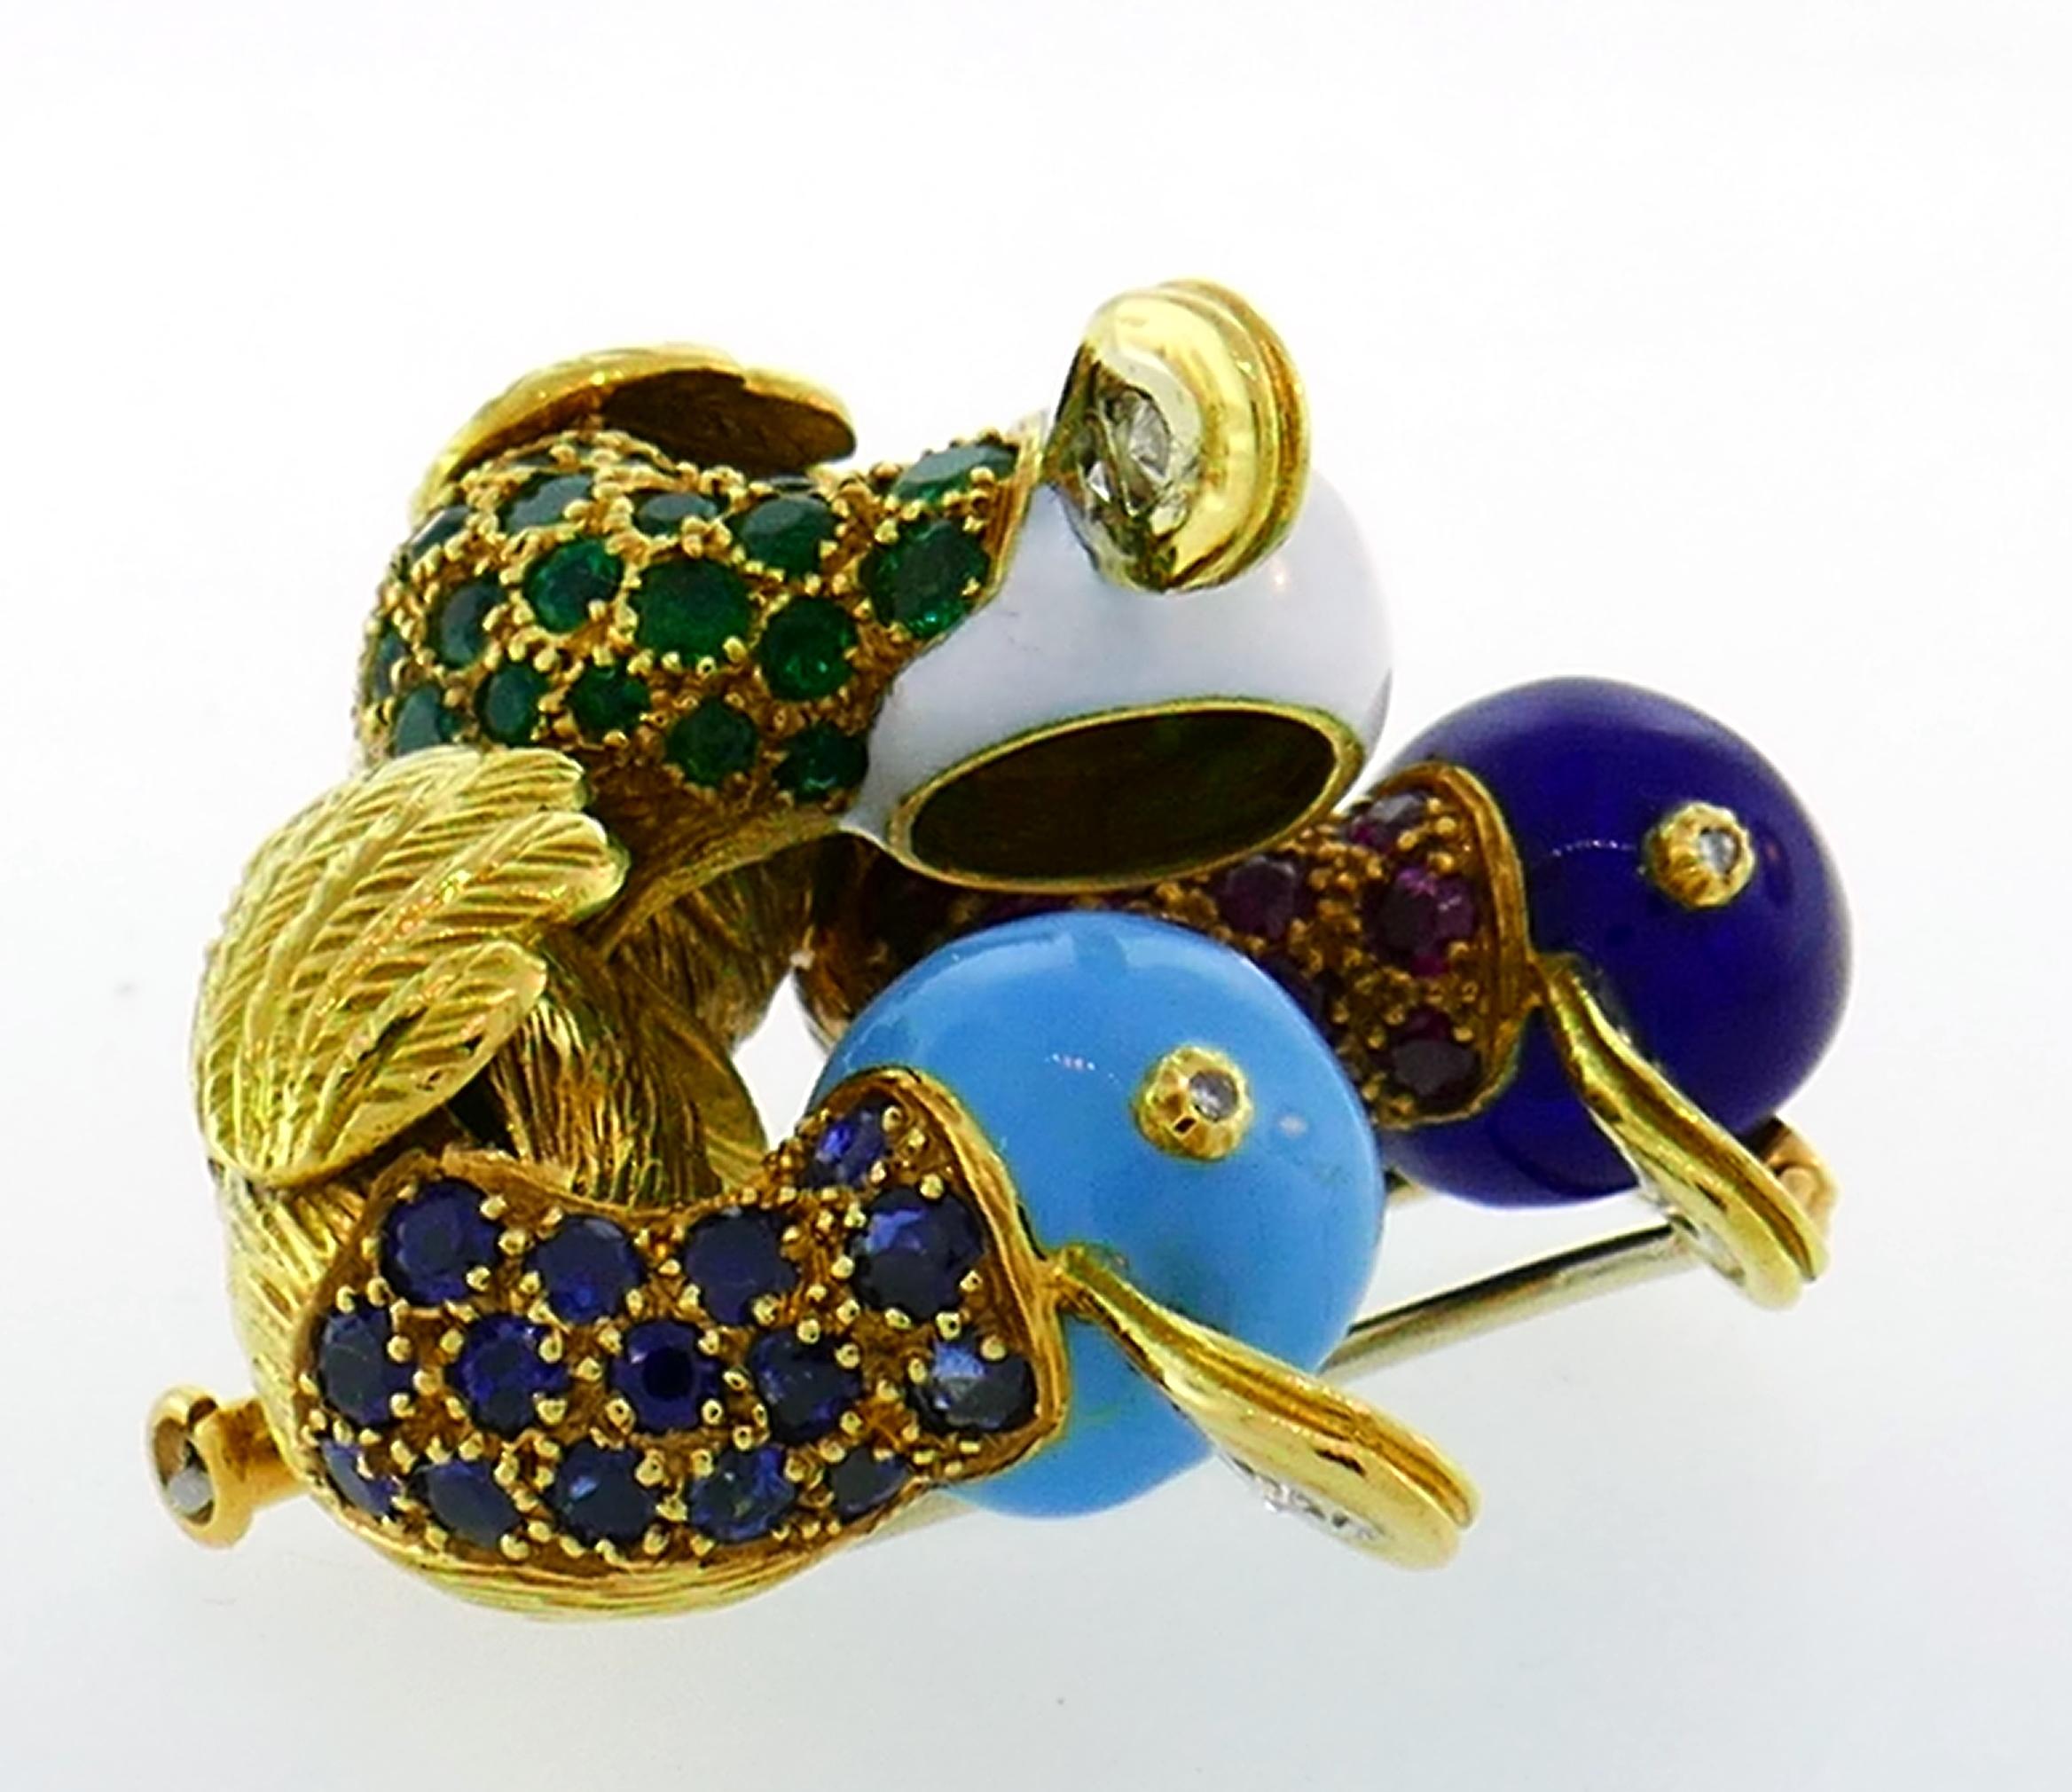 Lovely joyful clip created in France in the 1950s. Depicting three ducks, fun and articulated, the brooch is definitely a conversational piece. Colorful and wearable, the clip is a great addition to your jewelry collection. 
The pin is made of 18